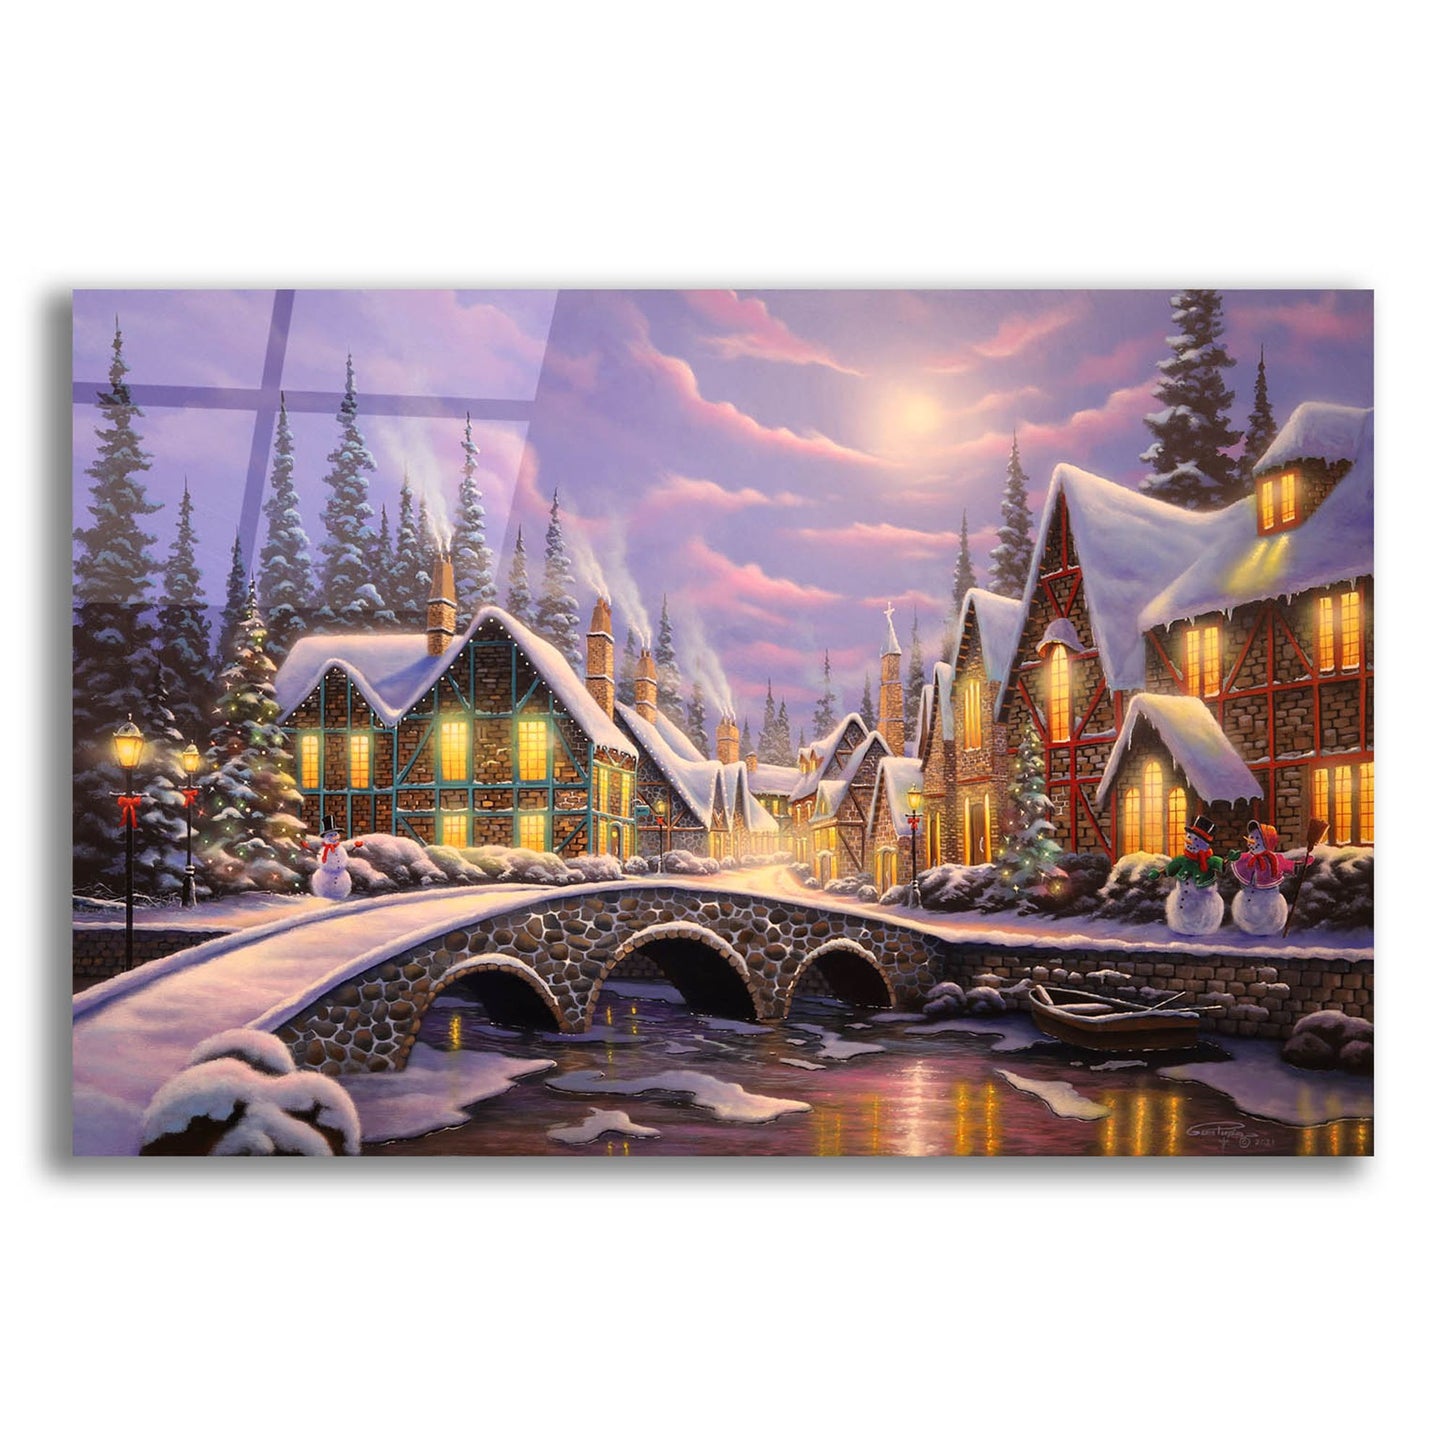 Epic Art 'A Snowy Christmas' by Geno Peoples, Acrylic Glass Wall Art,16x12